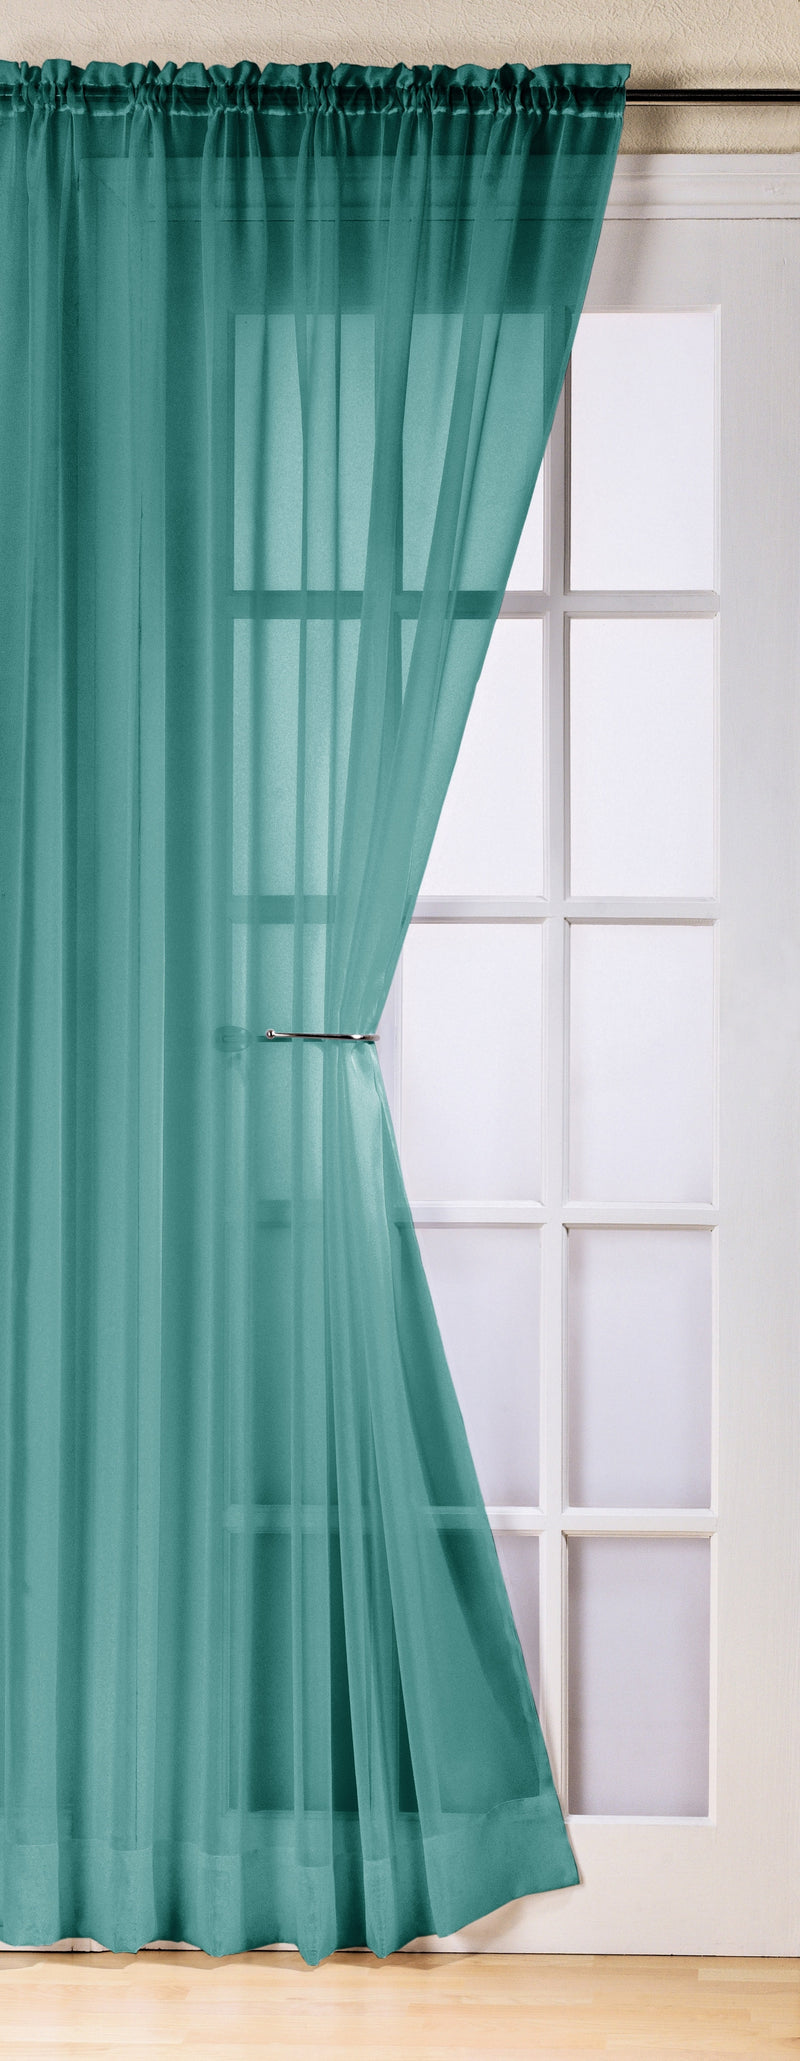 Trent Teal Slot Top Voile Panels